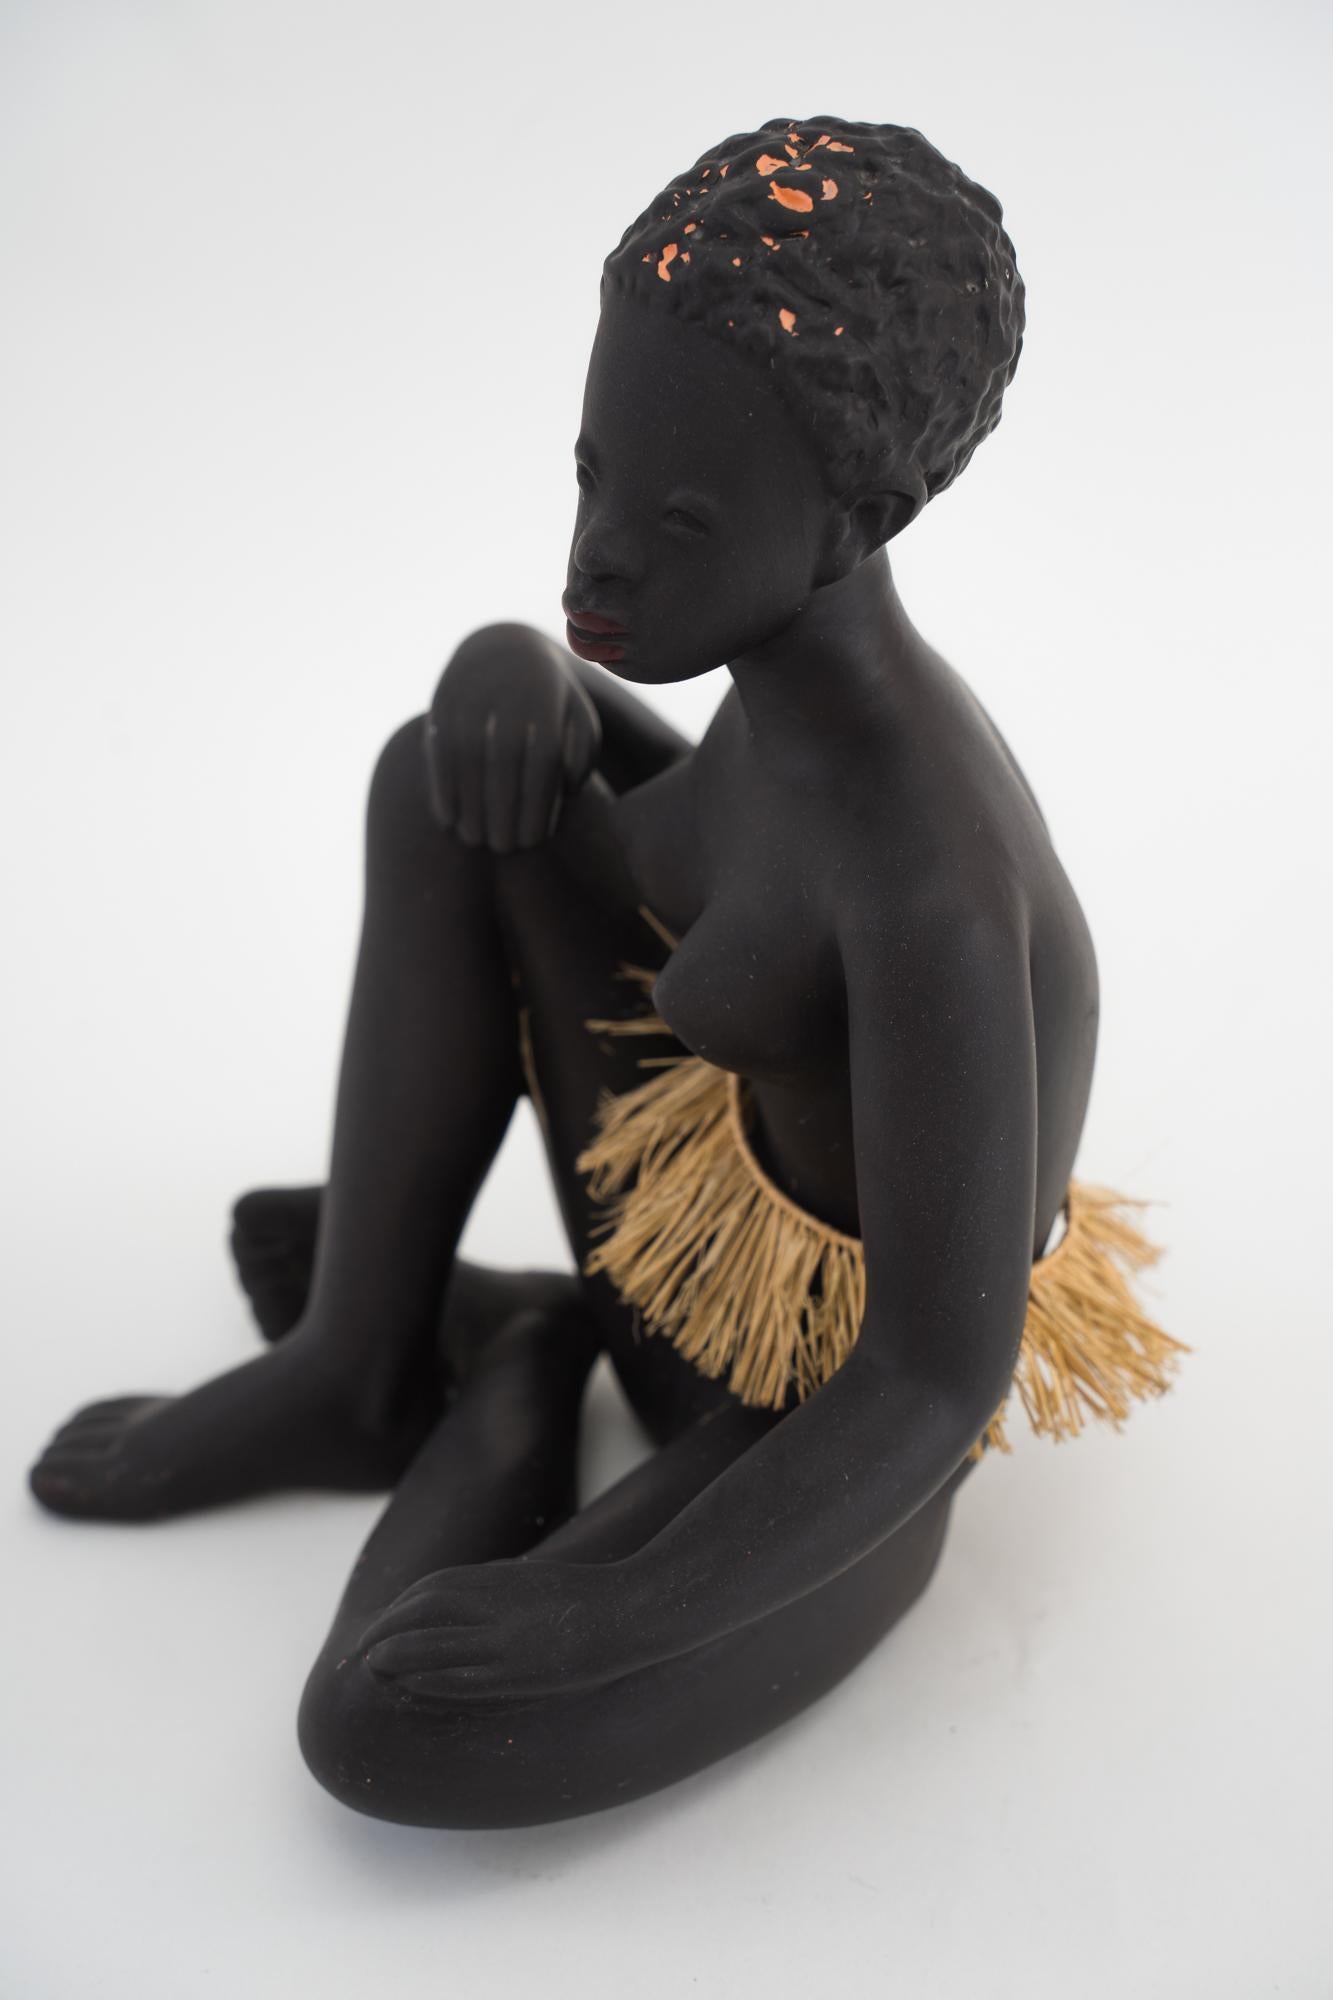 Mid-Century Modern Exotic African Women Sculpture by Leopold Anzengruber, Vienna 1950s For Sale